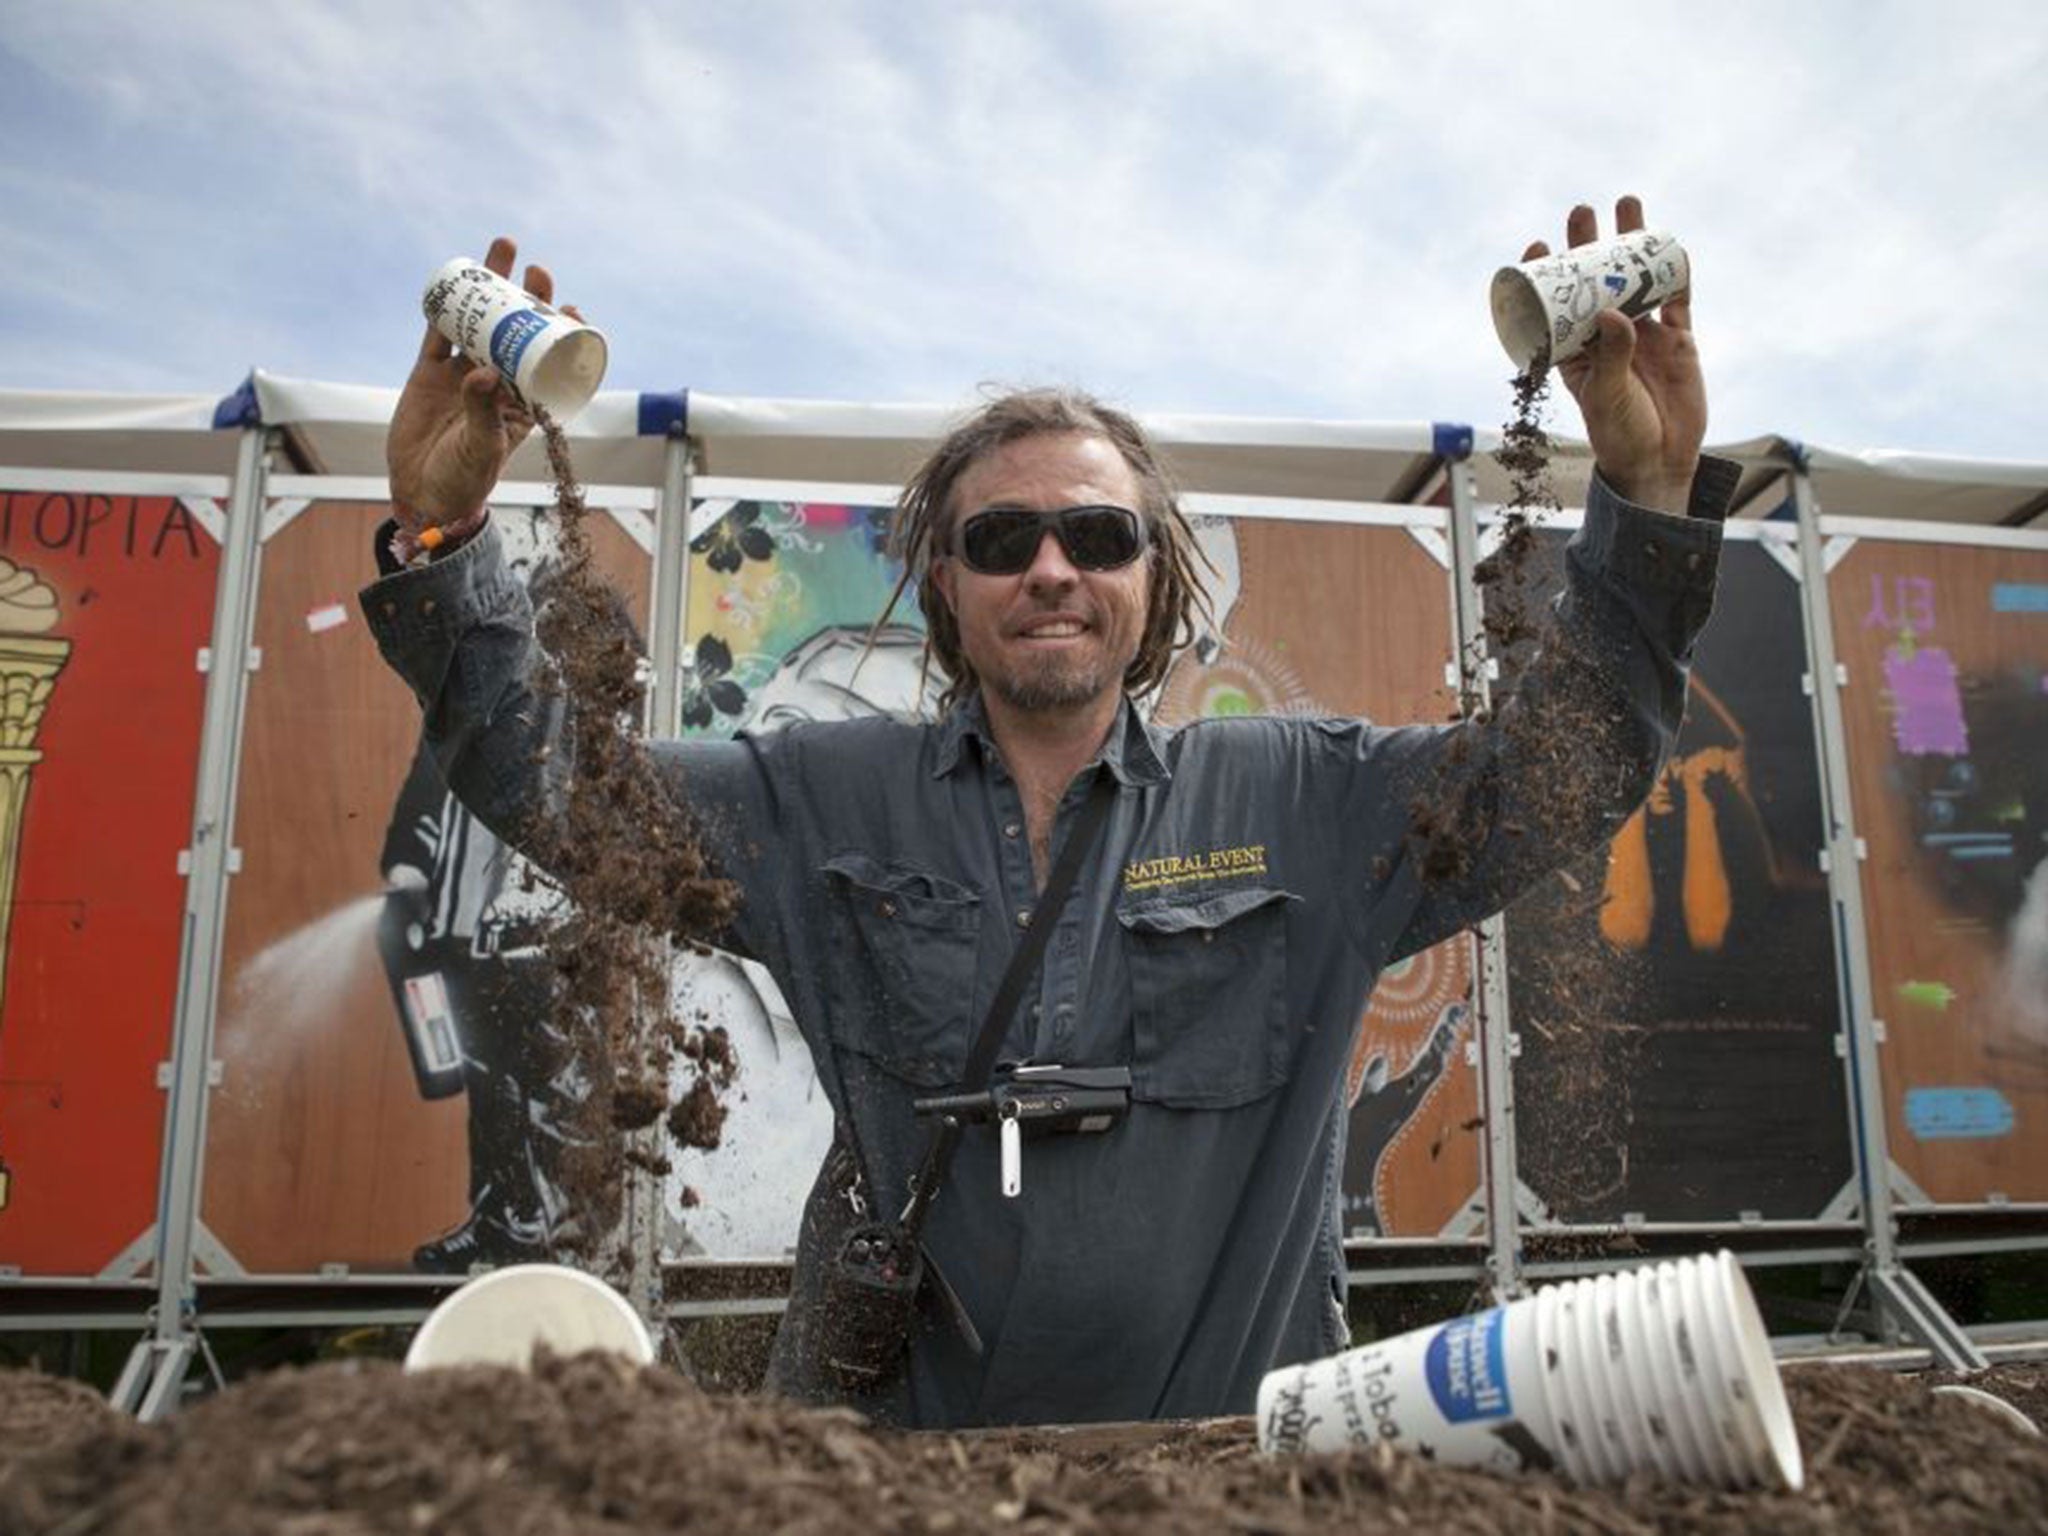 Hamish Skermer who runs the composting toilets at Glastonbury with his firm Natural Events